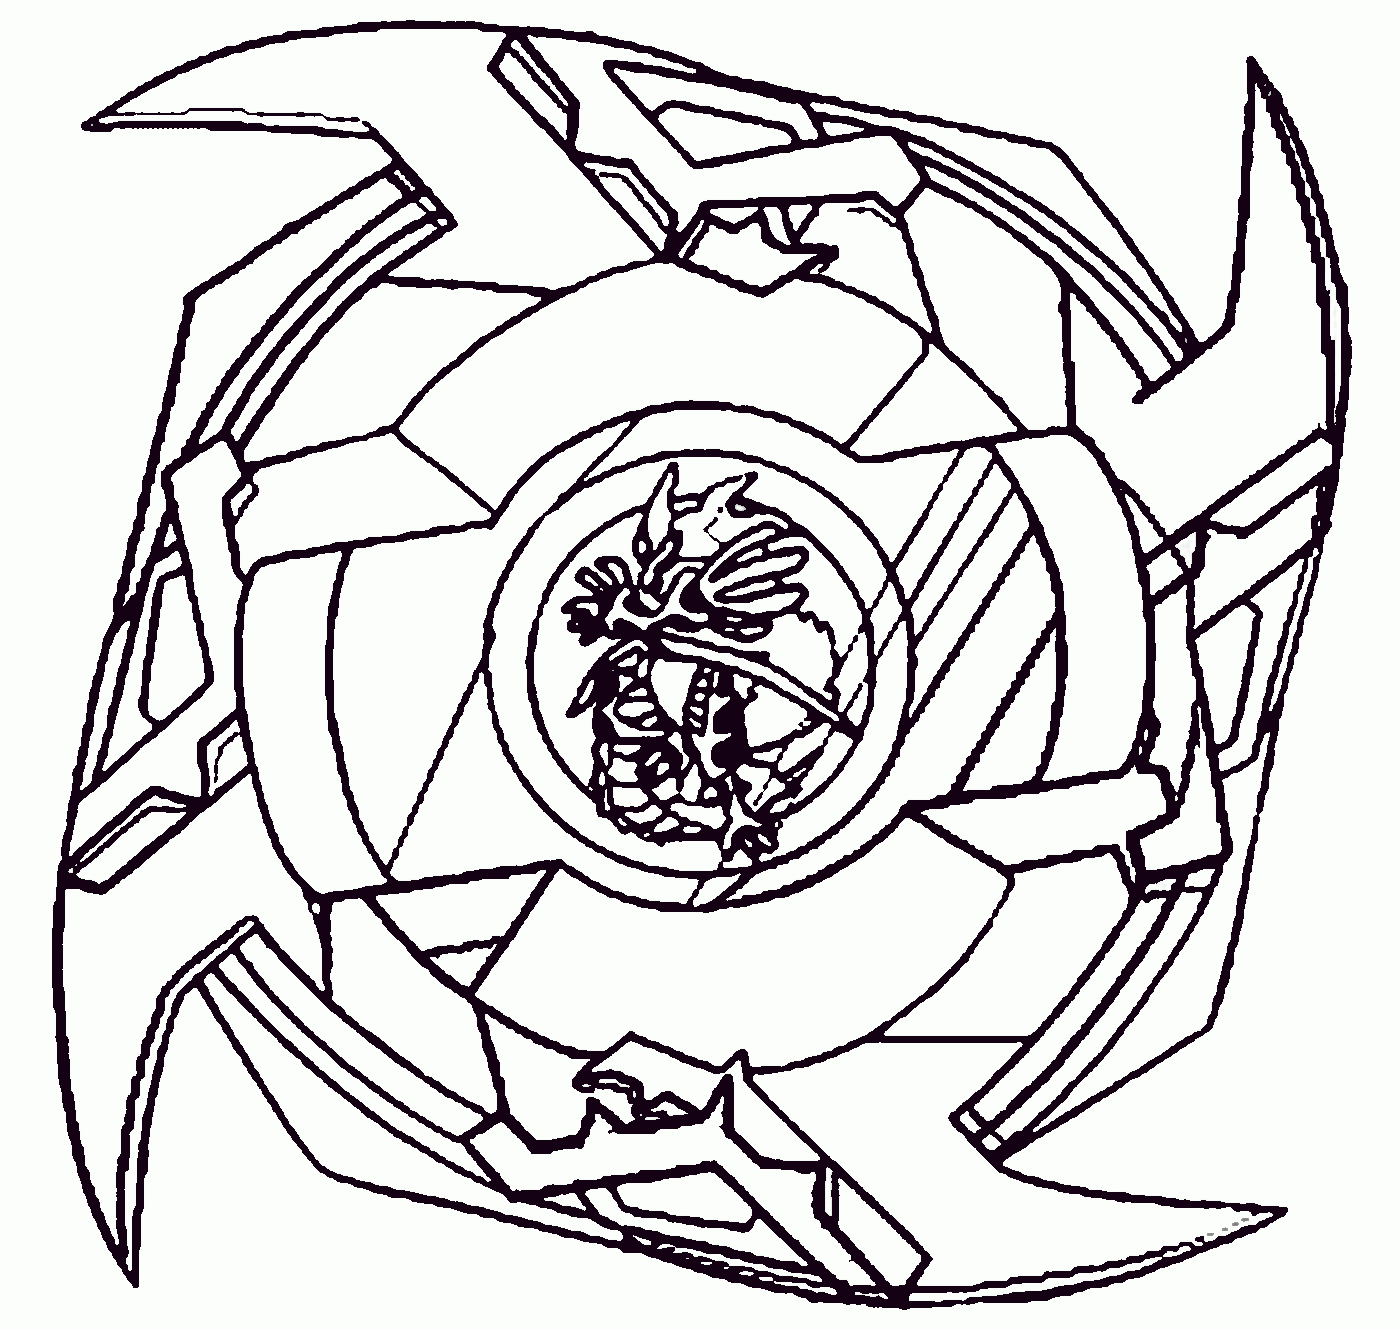 beyblade coloring pages in 2020 | Cartoon coloring pages, Super coloring  pages, Coloring pages